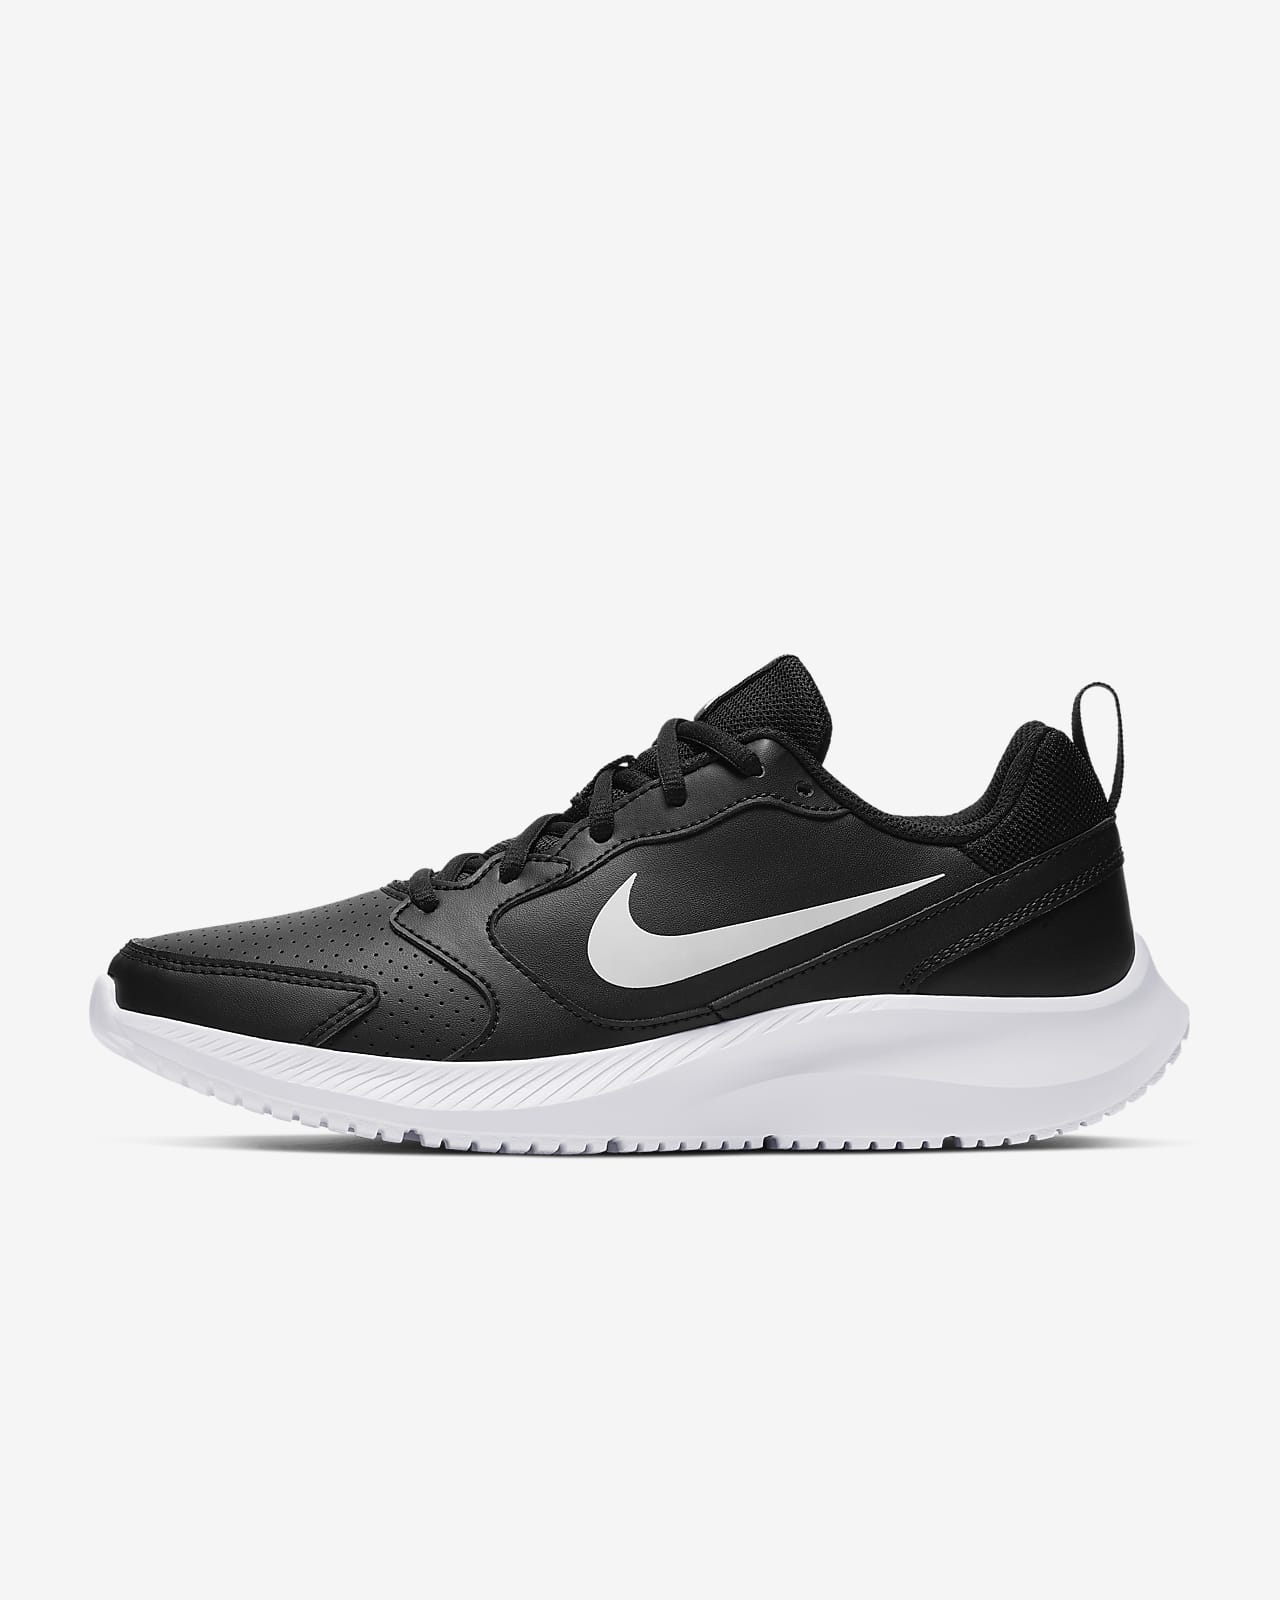 Chaussure Nike Todos RN pour Femme. Nike FR